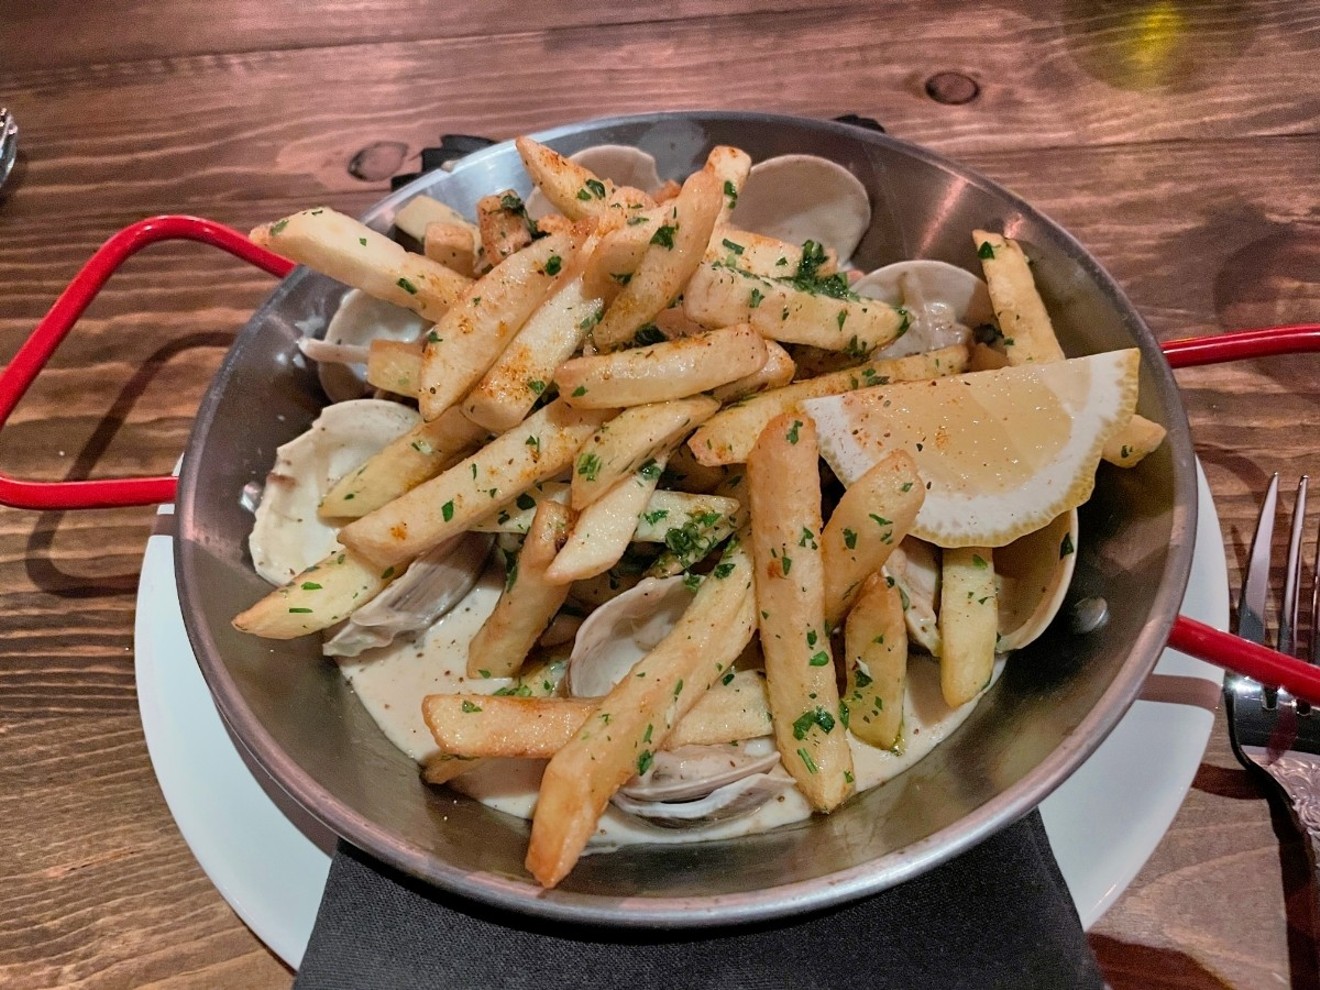 Clam chowder fries at the Katherine